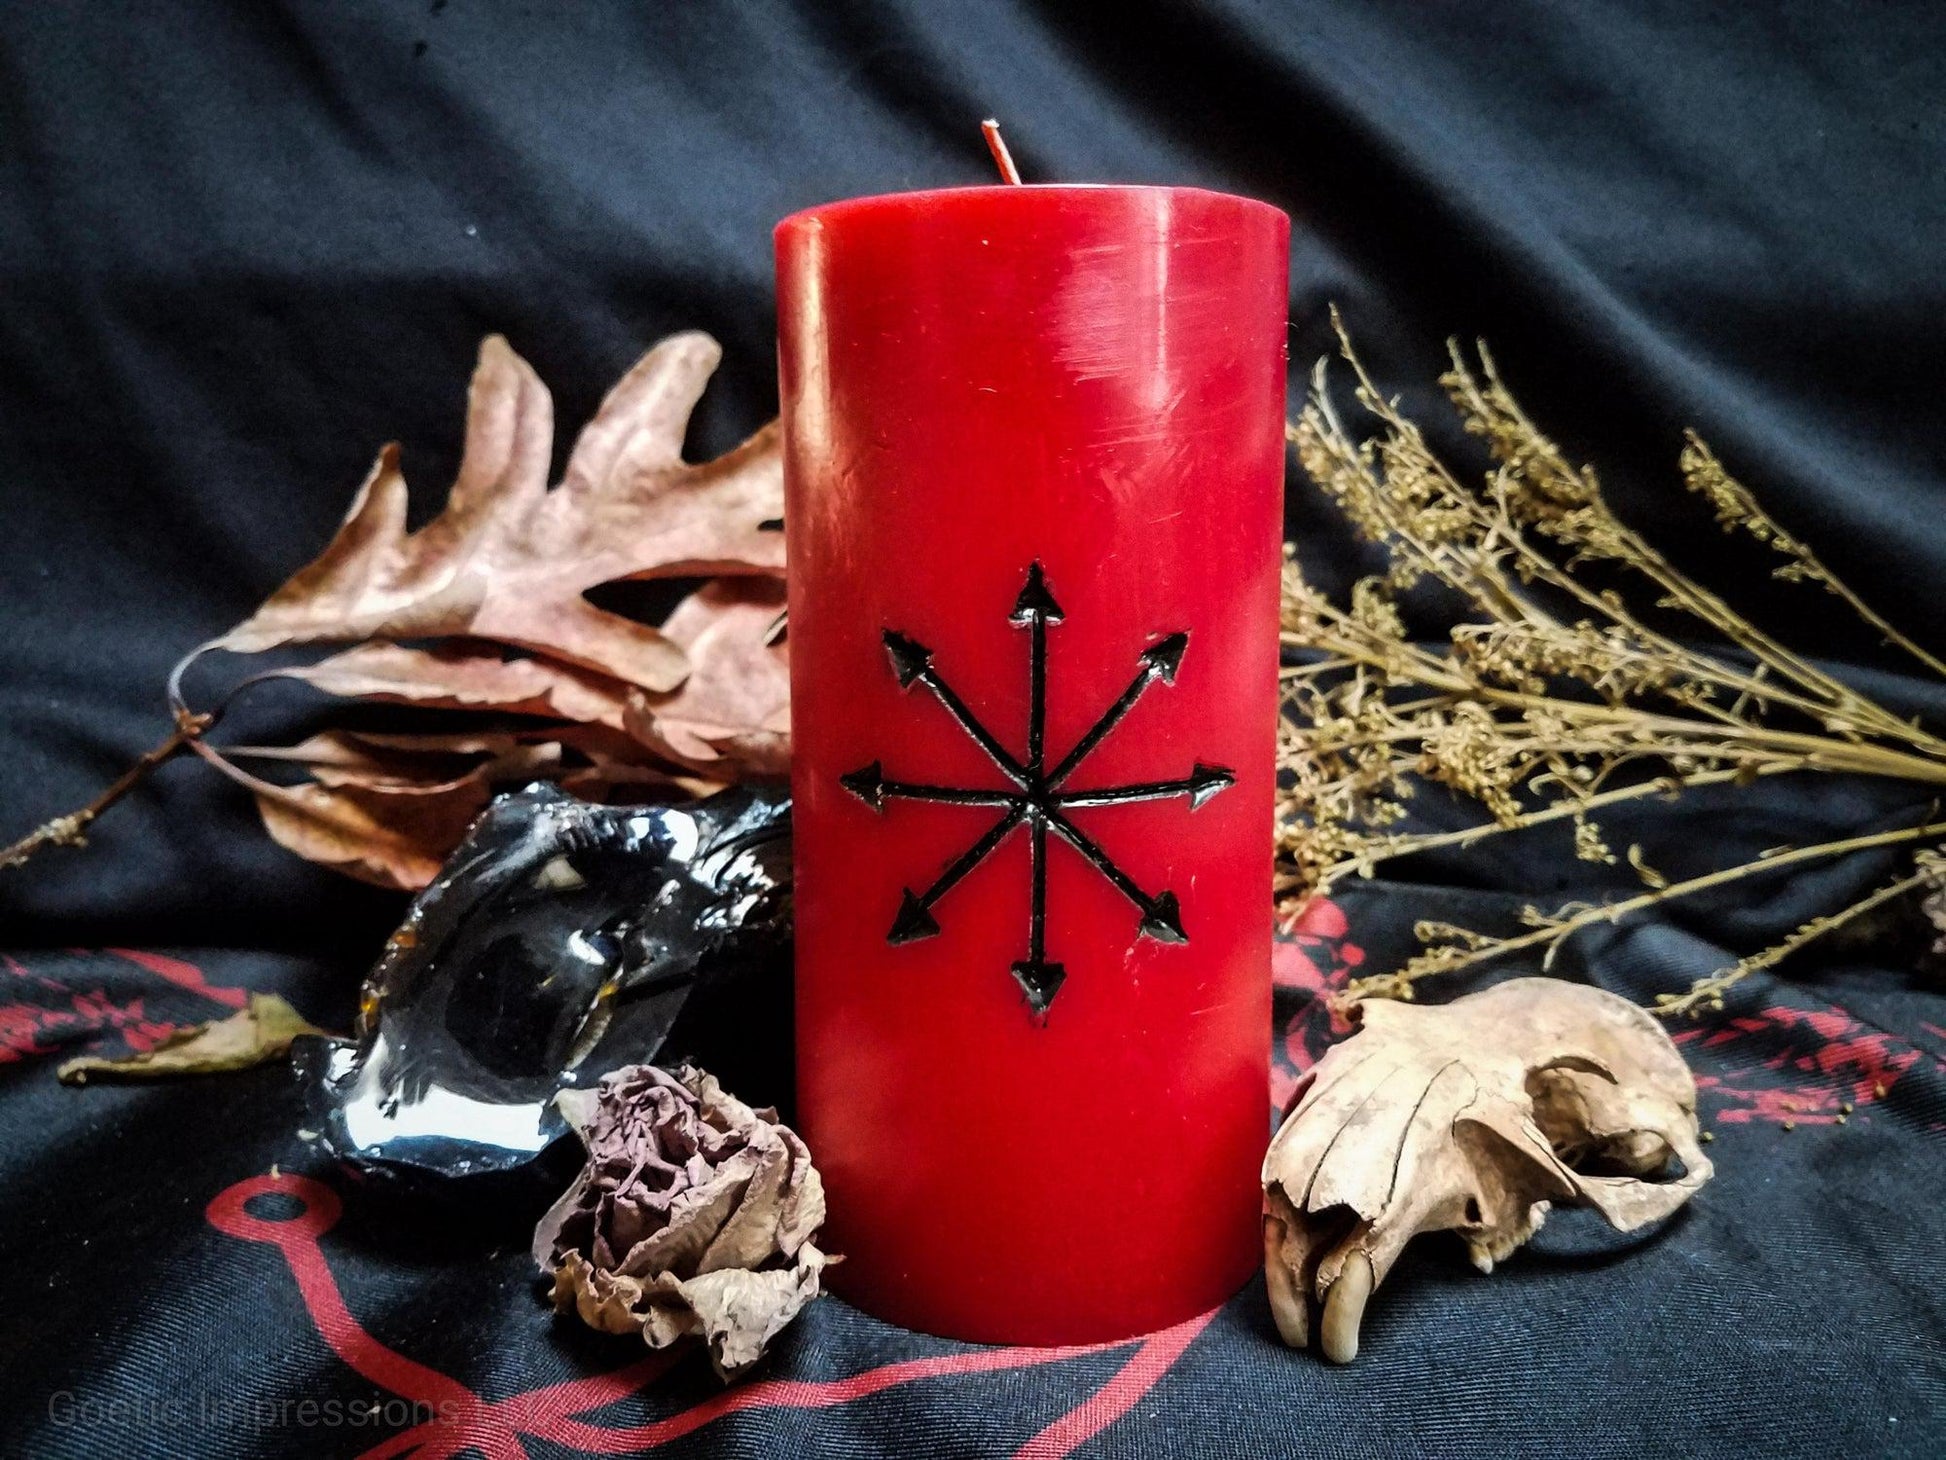 Red pillar candle with Chaos star symbol carved into it.